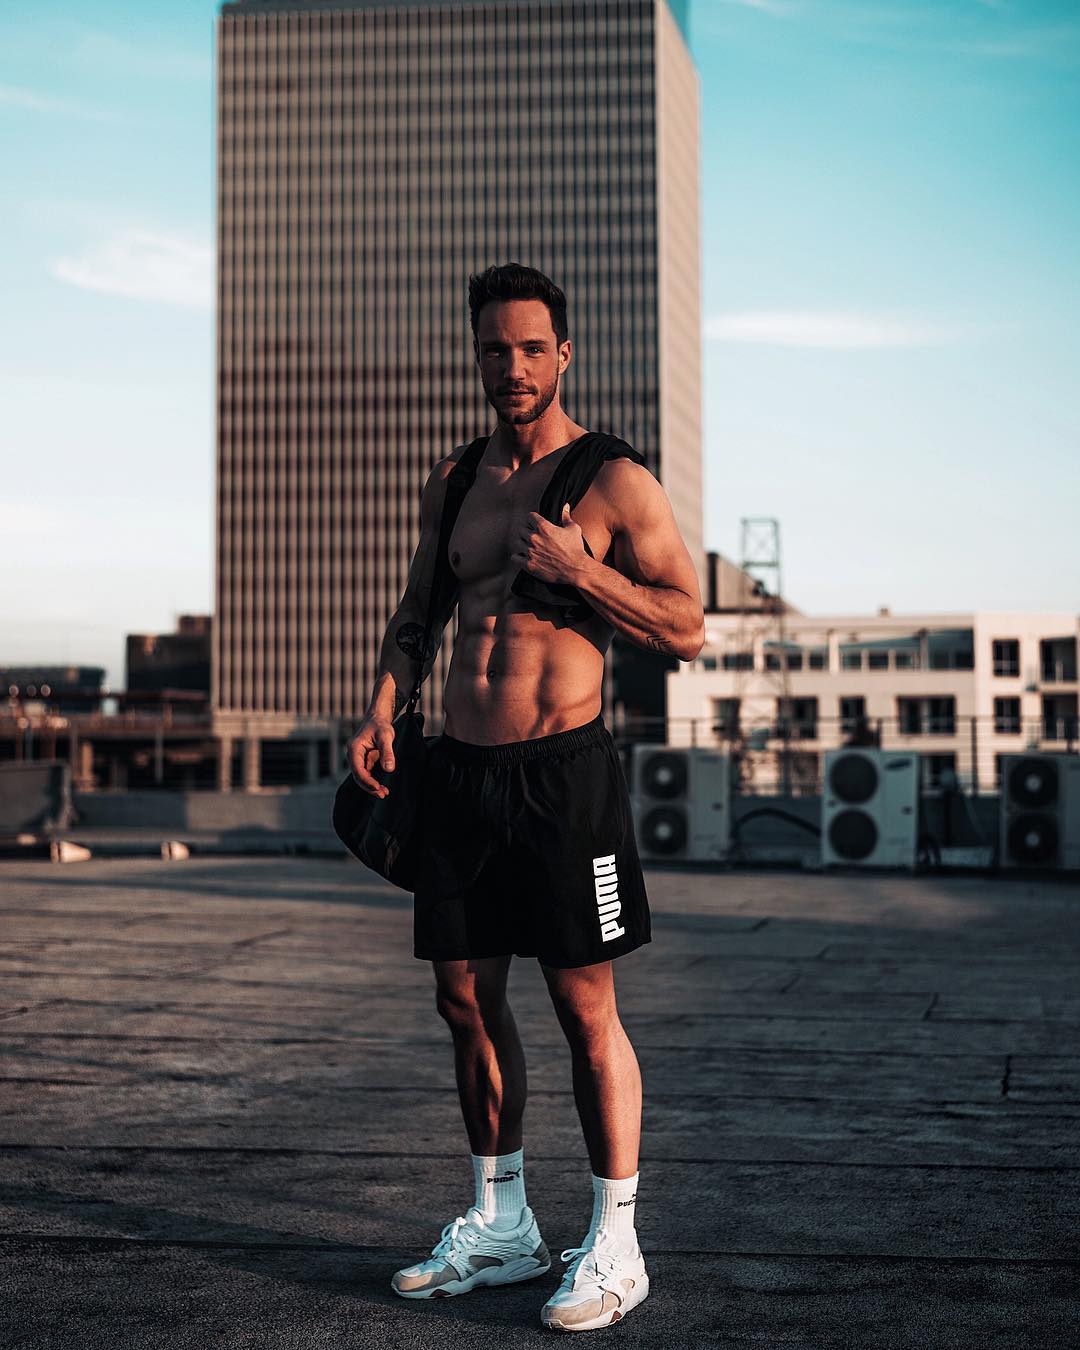 handsome-fit-man-huge-forehead-shirtless-body-daddy-abs-street